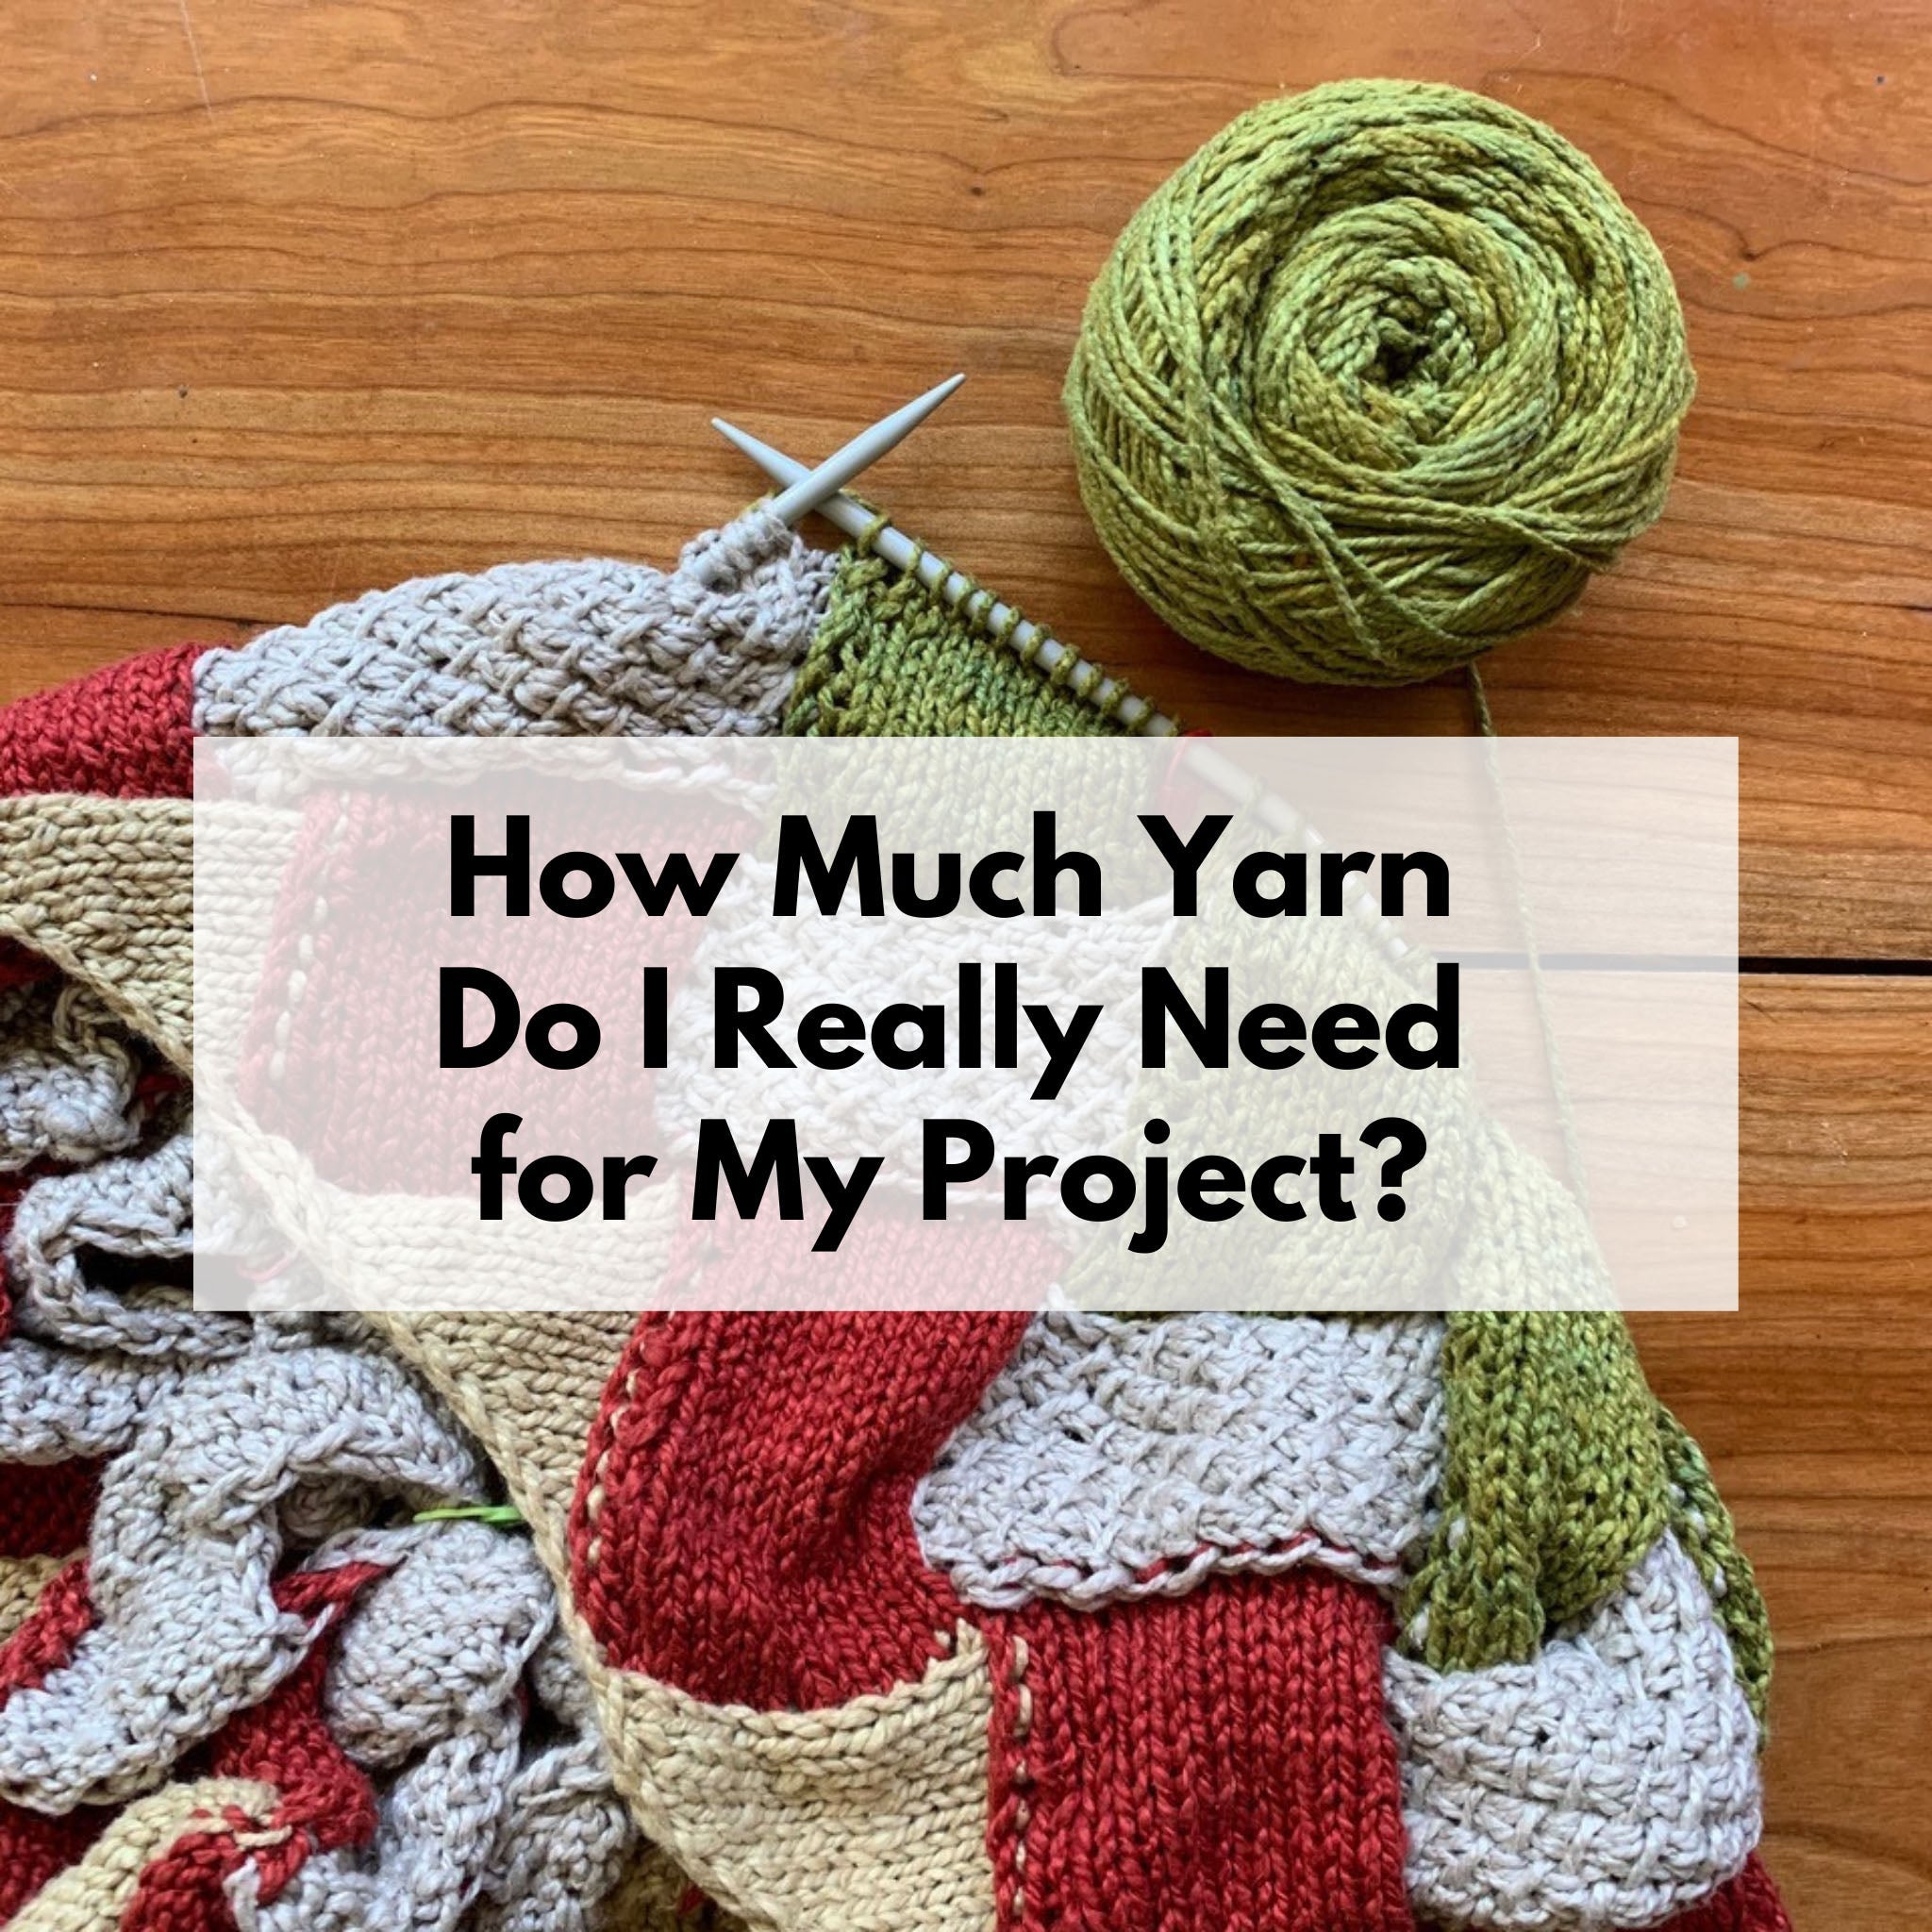 How Much Yarn Do I Need For a Crochet Project? - Easy Crochet Patterns